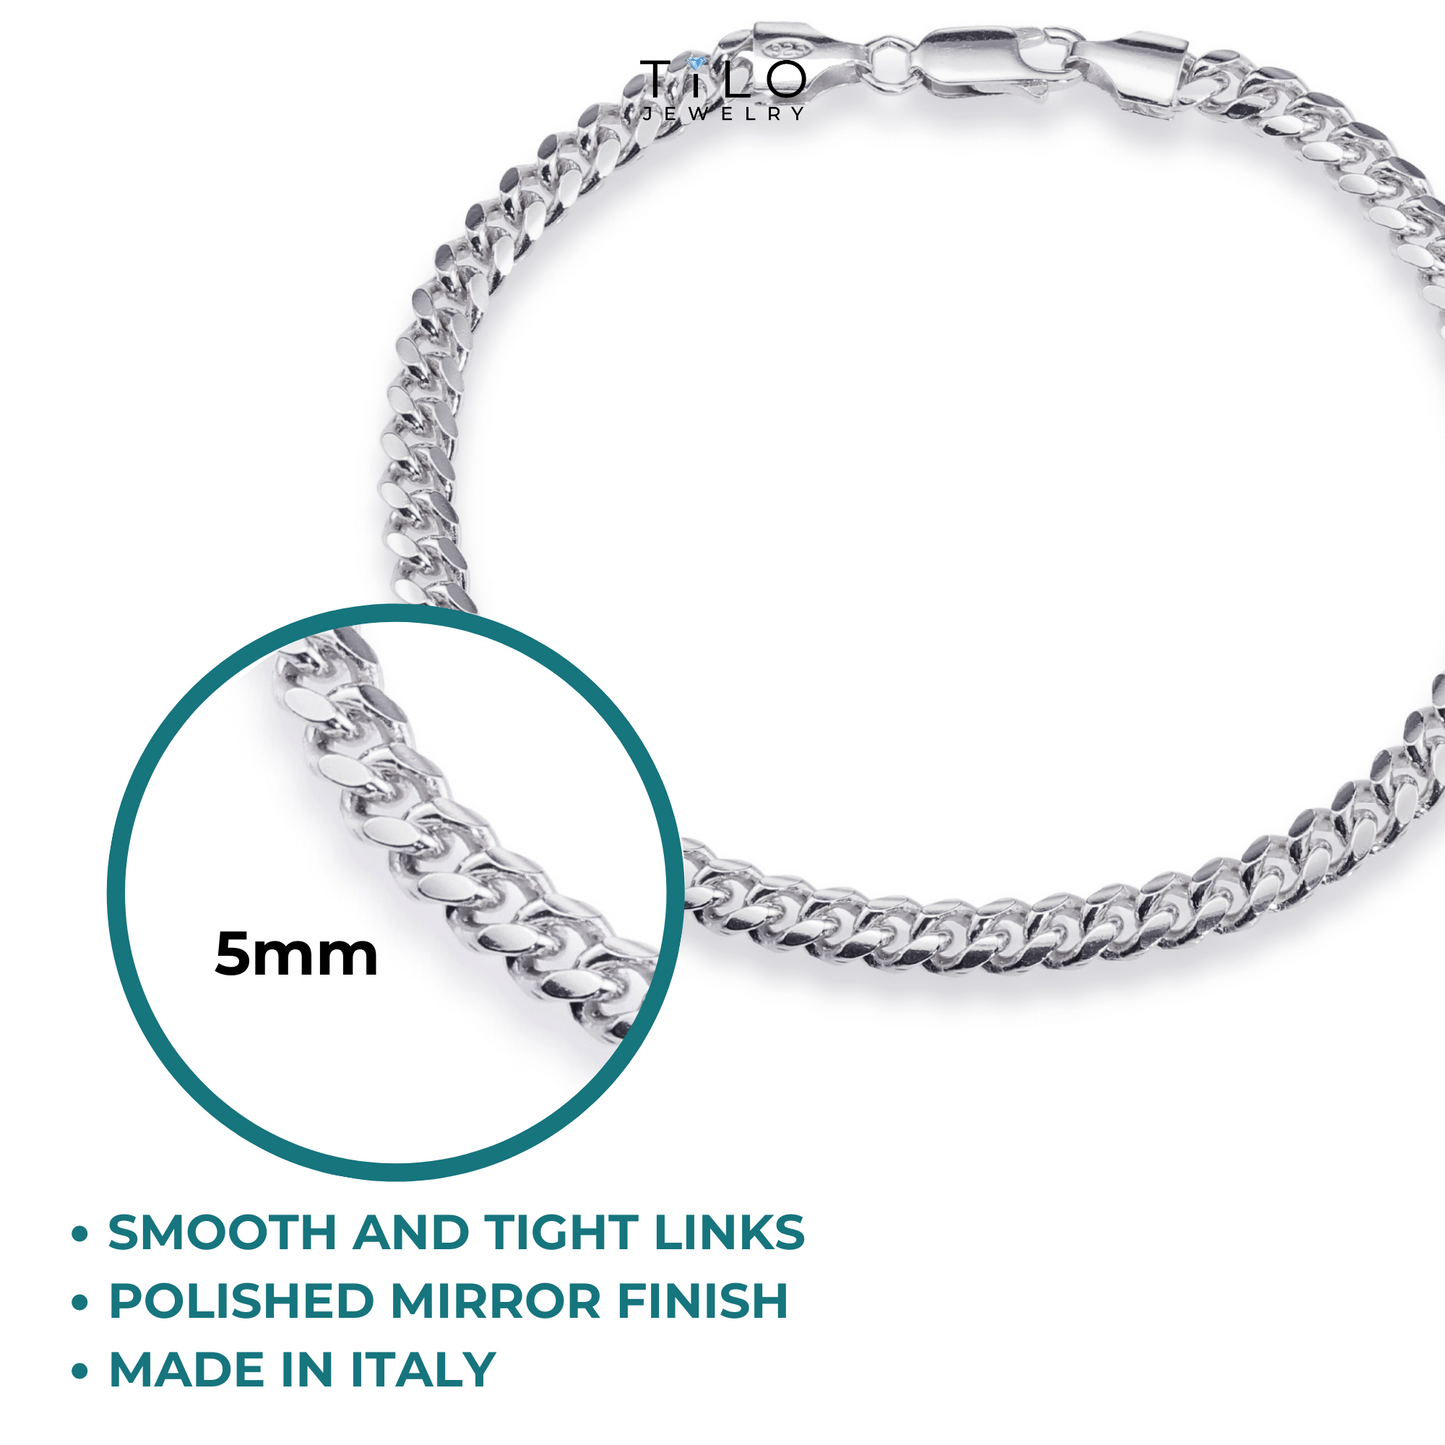 Adjustable Miami Cuban Link Bracelet in Solid Sterling Silver, Bracelet with Adjustable Length 7 to 8 inches, Made In Italy